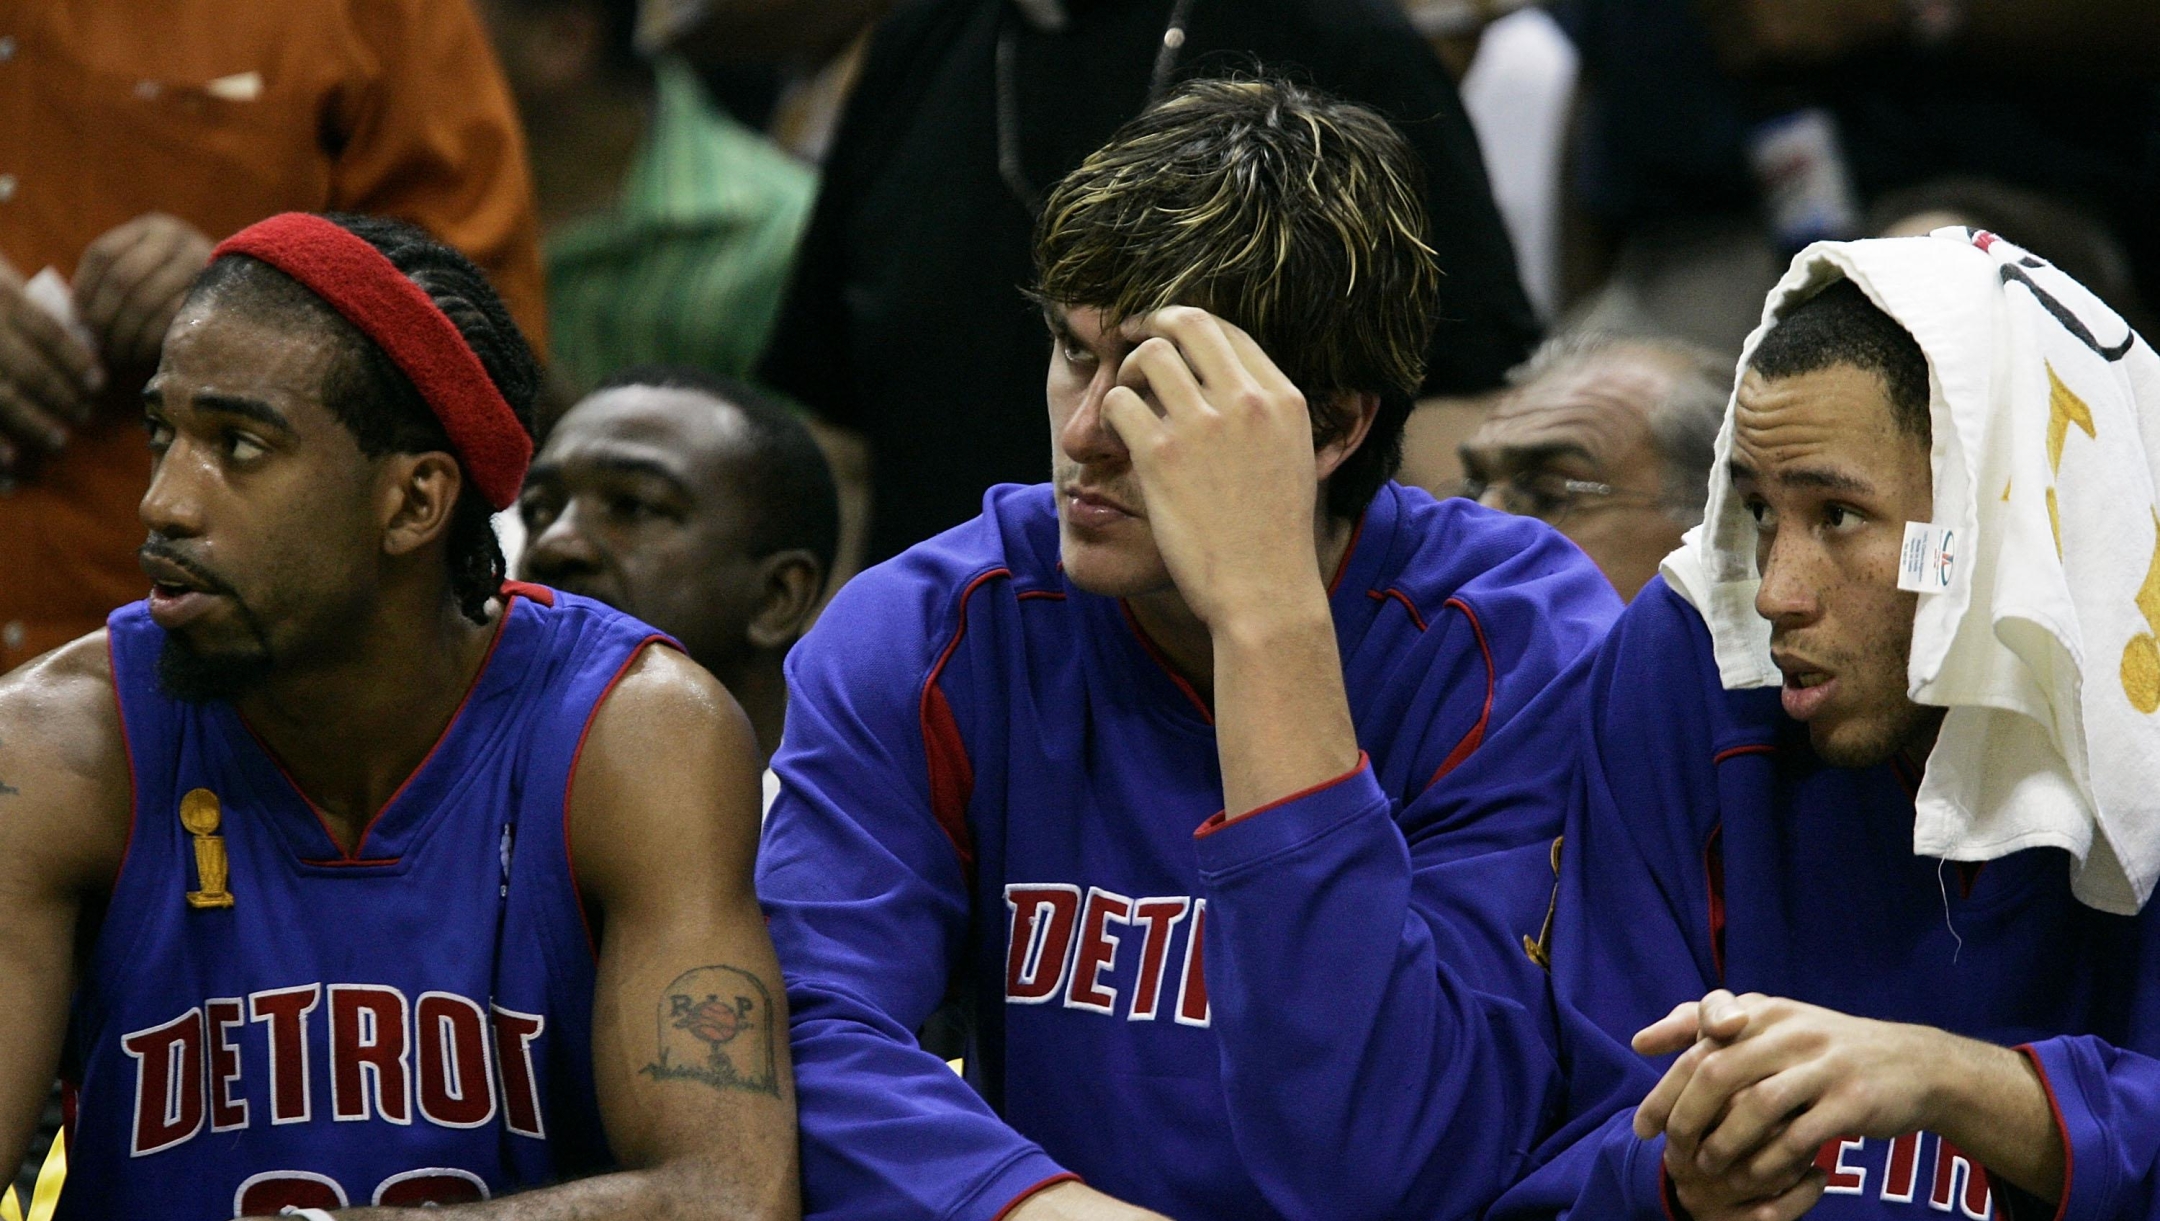 SAN ANTONIO - JUNE 12: (L to R) Richard Hamilton #32, Darko Milicic #31 and Teyshaun Prince #22 of the Detroit Pistons watch the game in the second quarter from the bench against the San Antonio Spurs in Game two of the 2005 NBA Finals on June 12, 2005 at SBC Center in San Antonio, Texas. NOTE TO USER: User expressly acknowledges and agrees that, by downloading and or using this photograph, User is consenting to the terms and conditions of the Getty Images License Agreement. (Photo by Brian Bahr/Getty Images) *** Local Caption *** Richard Hamilton;Darko Milicic;Teyshaun Prince (Photo by BRIAN BAHR / Getty Images North America / Getty Images via AFP)